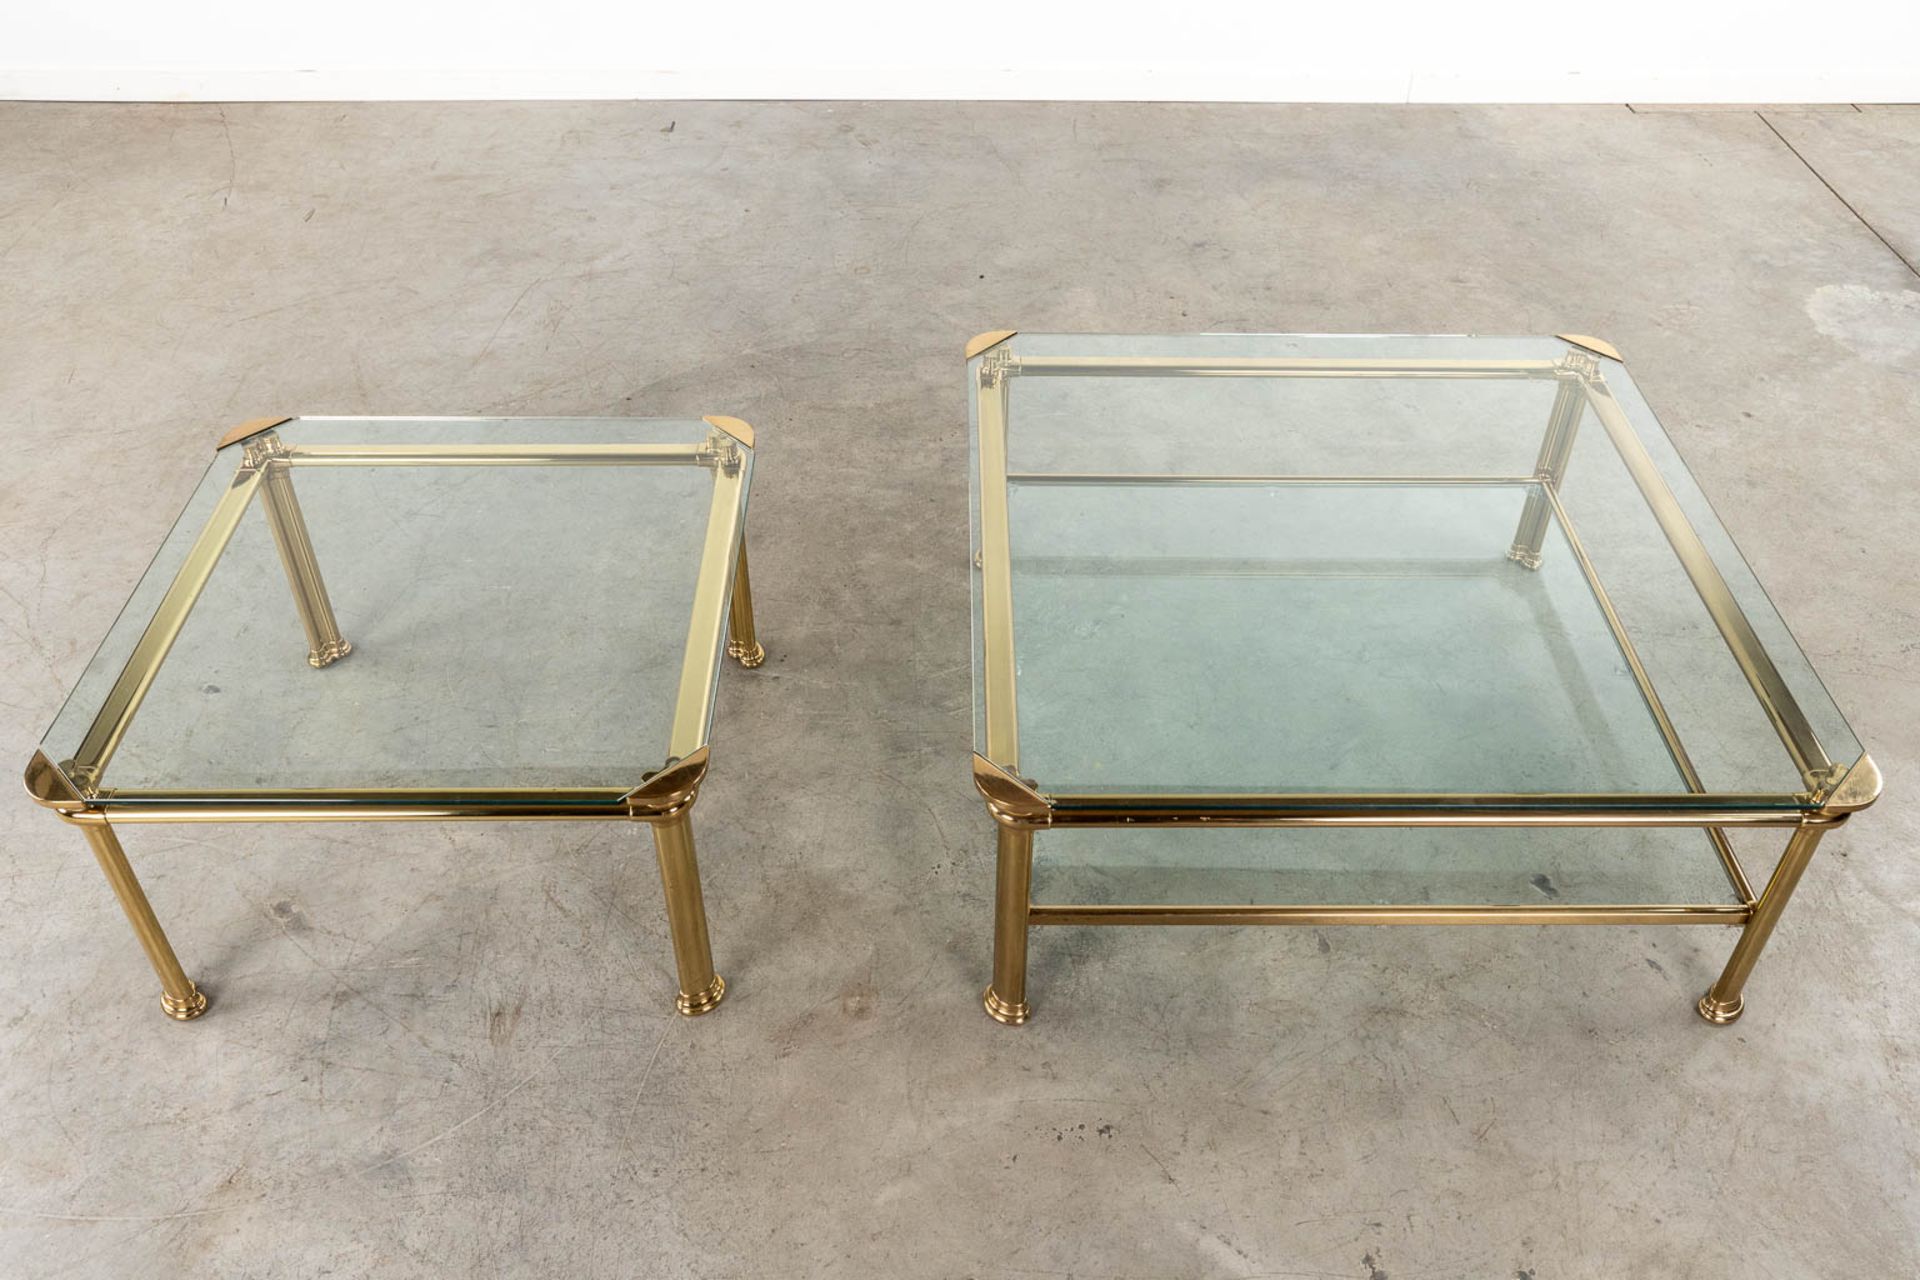 A large and small coffee table, brass and glass. Signed Mara. Circa 1980. (D:90 x W:90 x H:38 cm) - Image 4 of 6